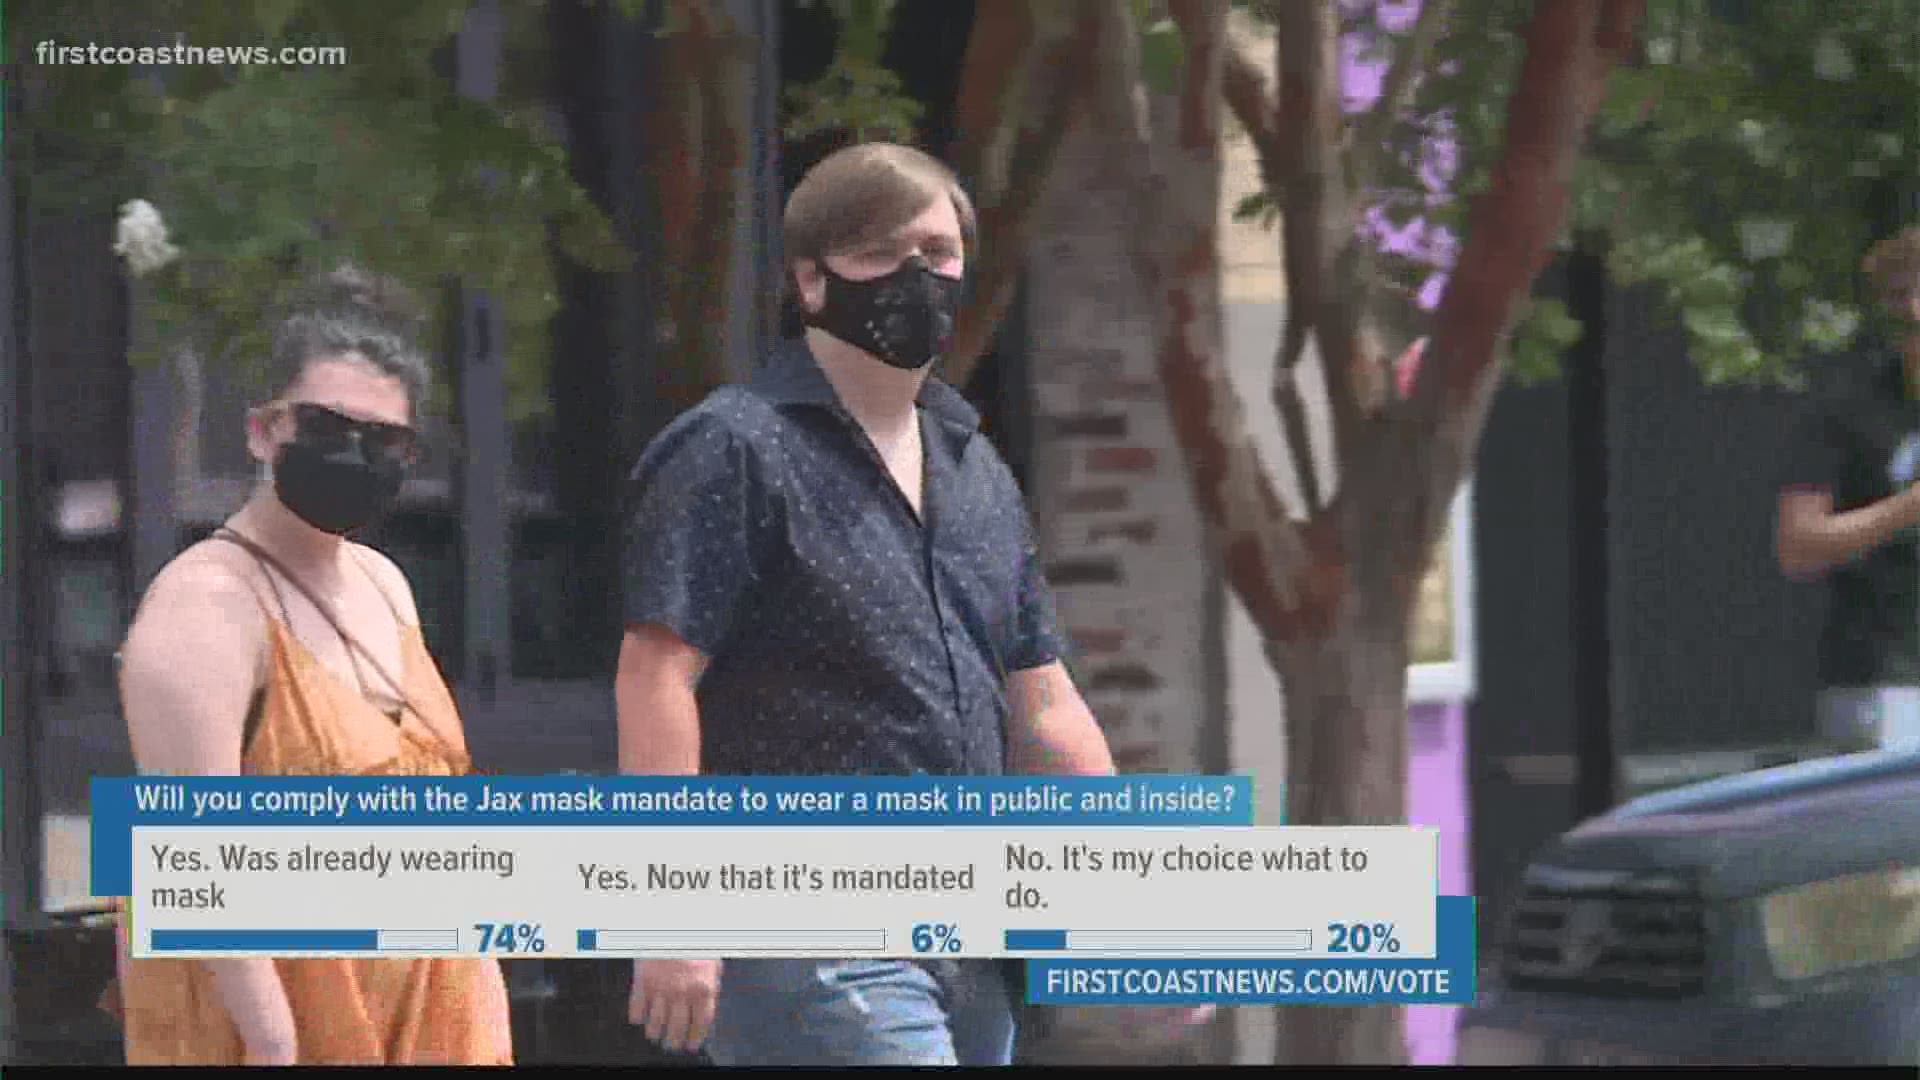 The requirement for wearing masks in public places indoors or where social distancing can't be practiced went into effect at 5 p.m. Monday.